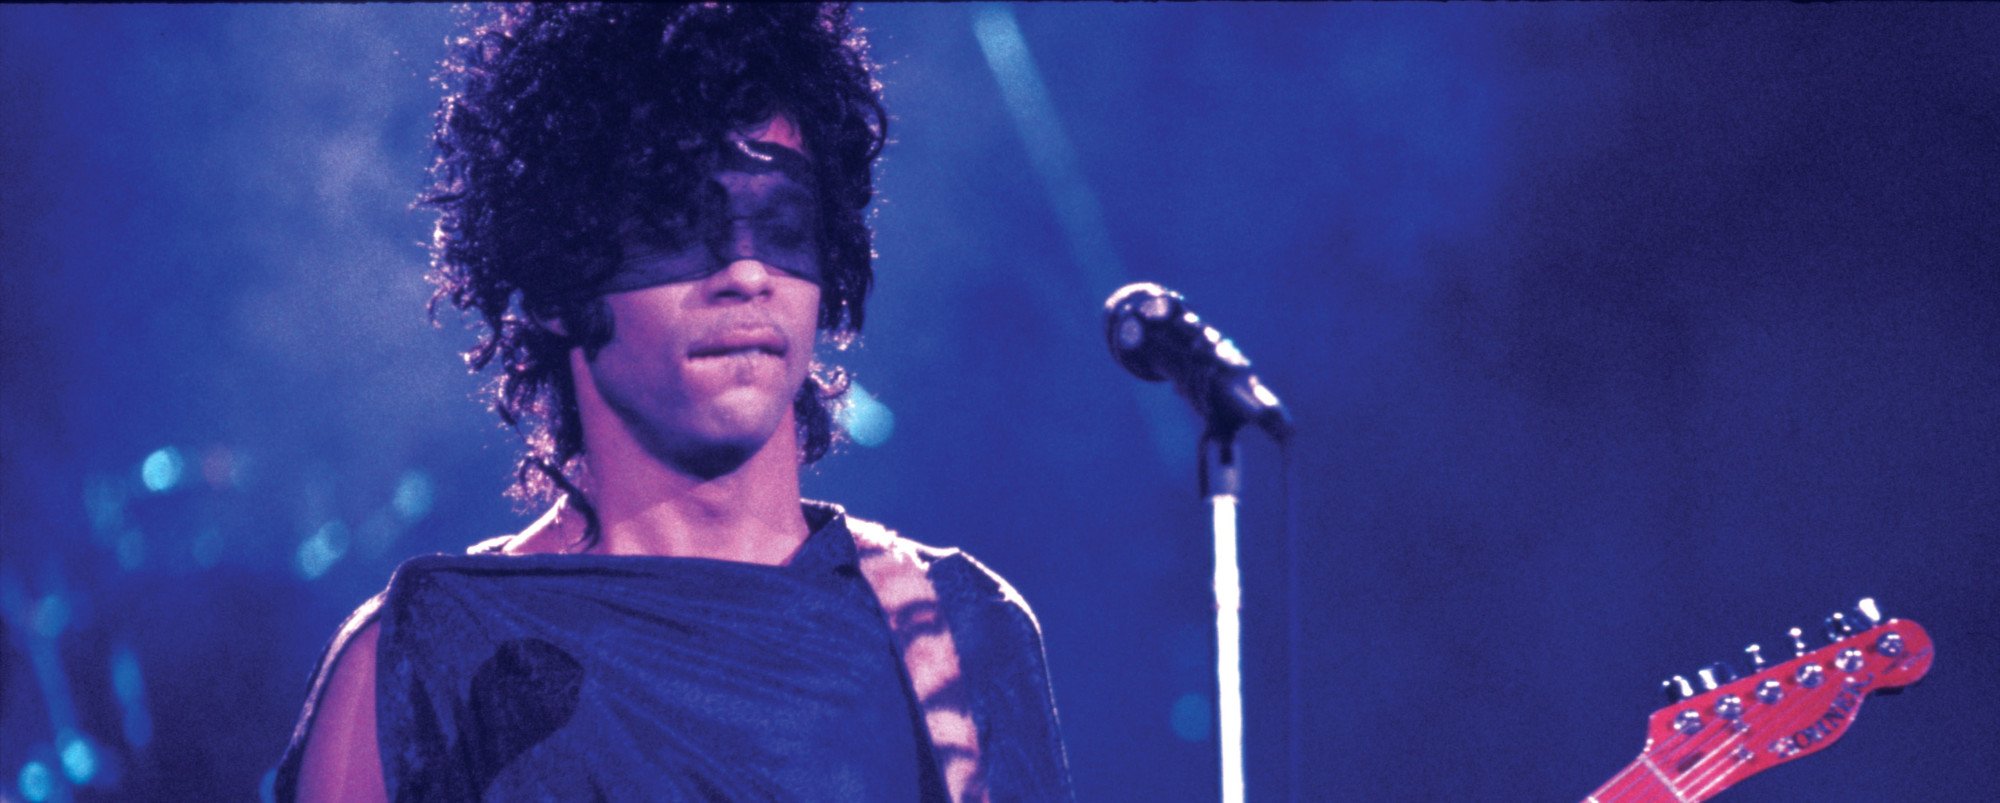 5 Songs You Didn't Know Prince Wrote That Were Made Famous by Other Artists